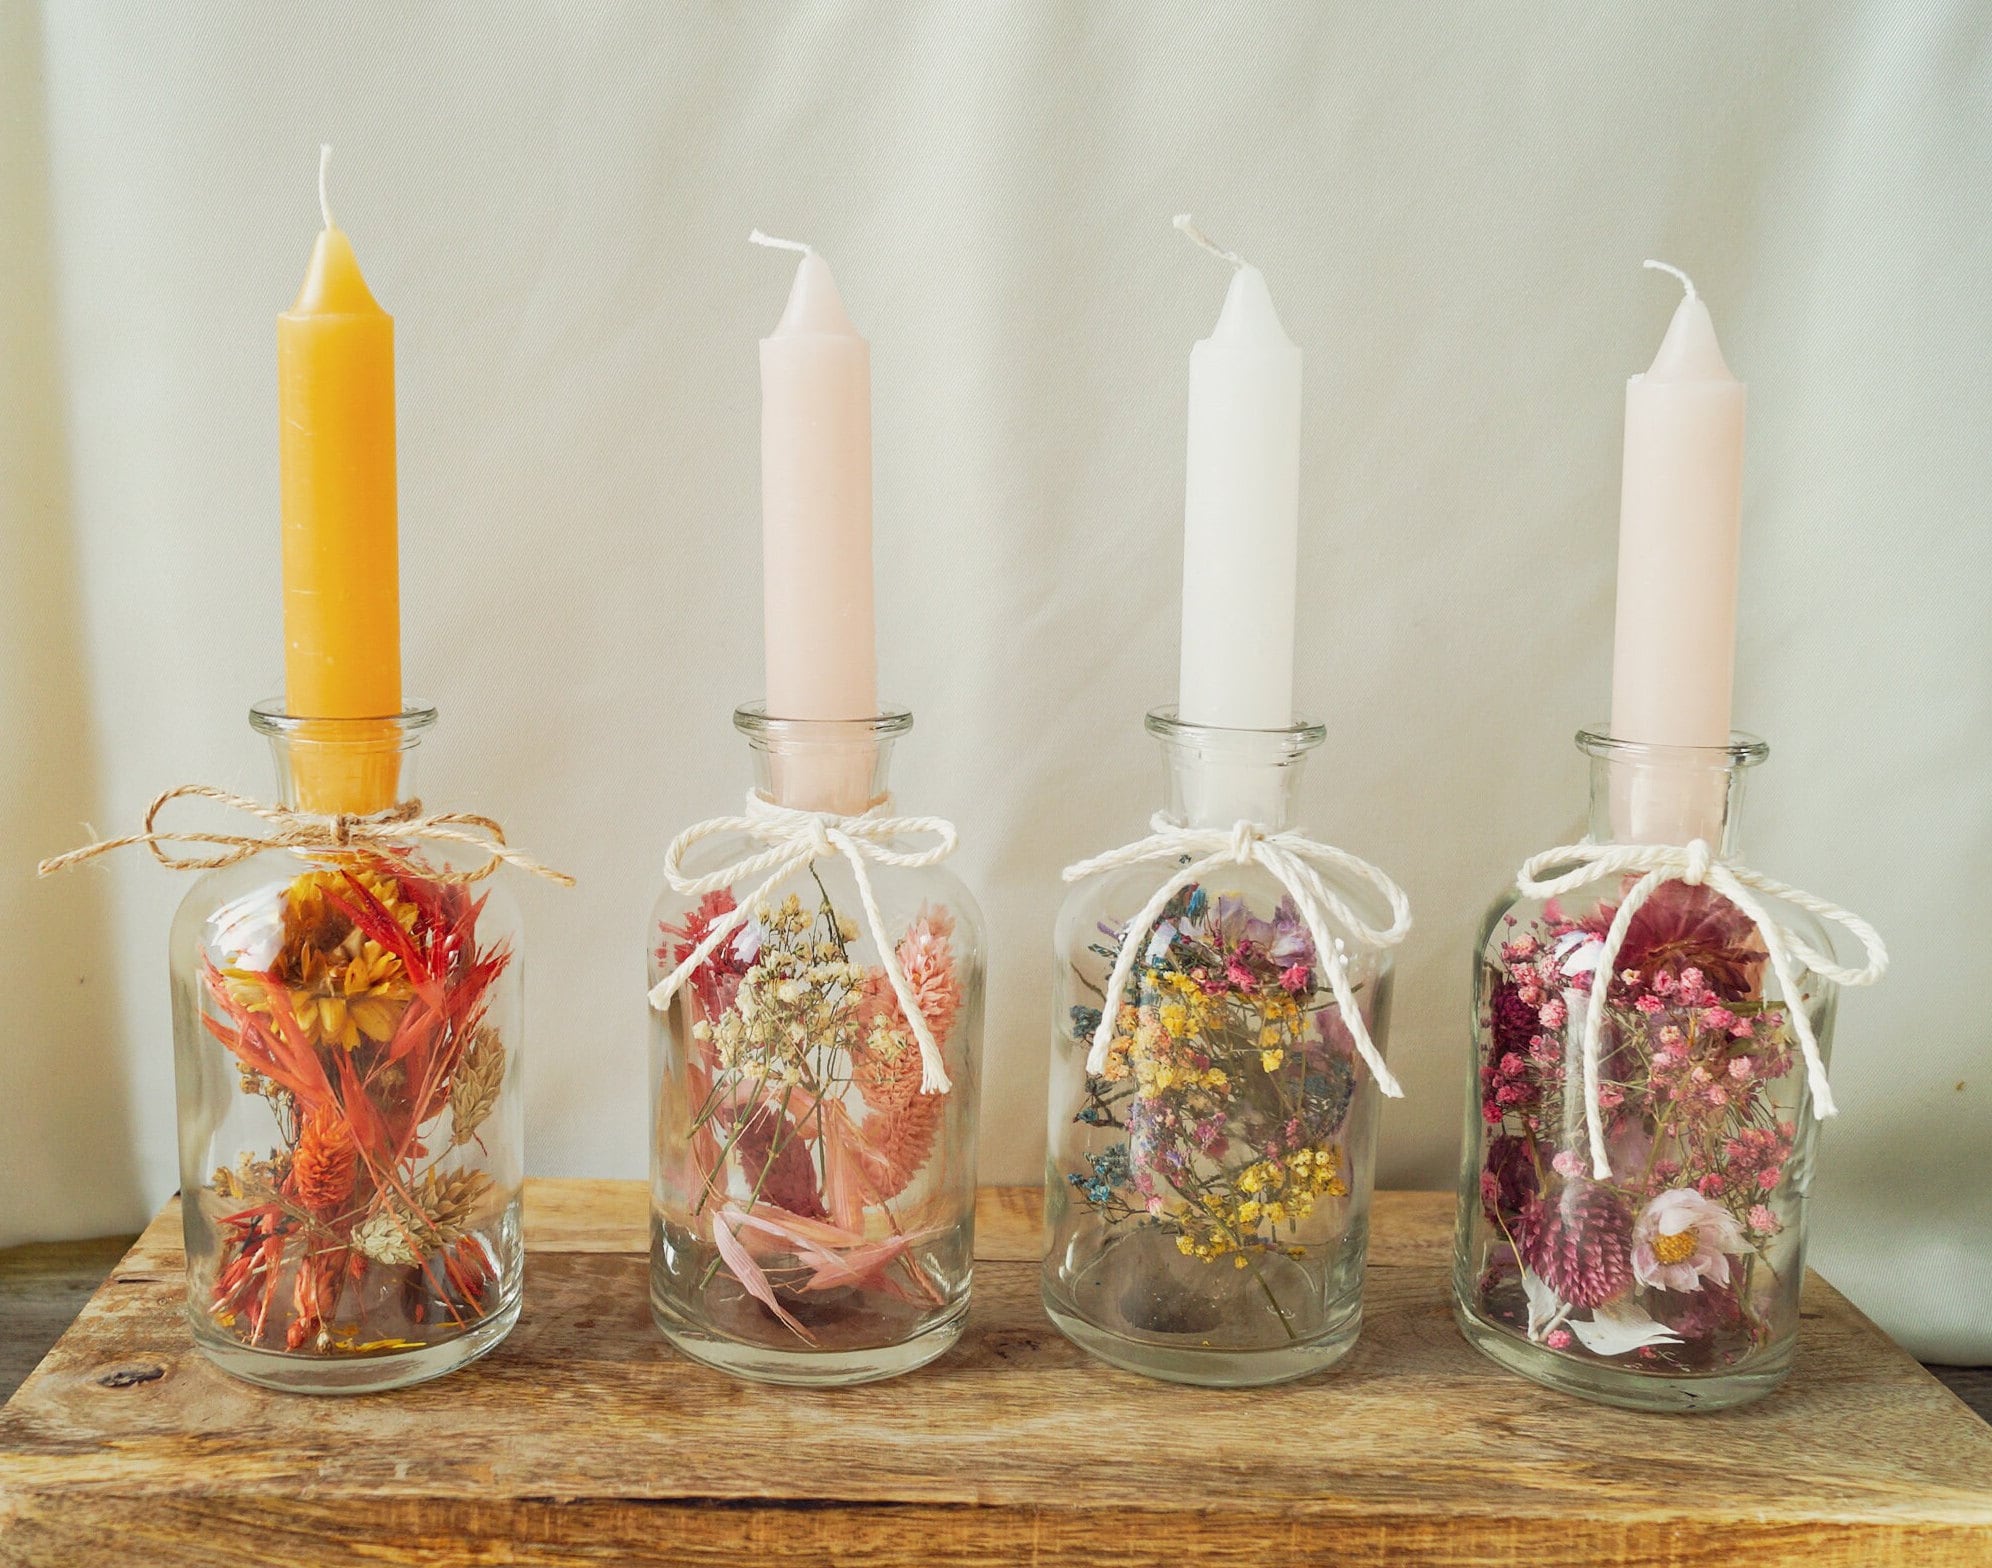 Decorating Candles with Dried Flowers: DIYs в журнале Ярмарки Мастеров